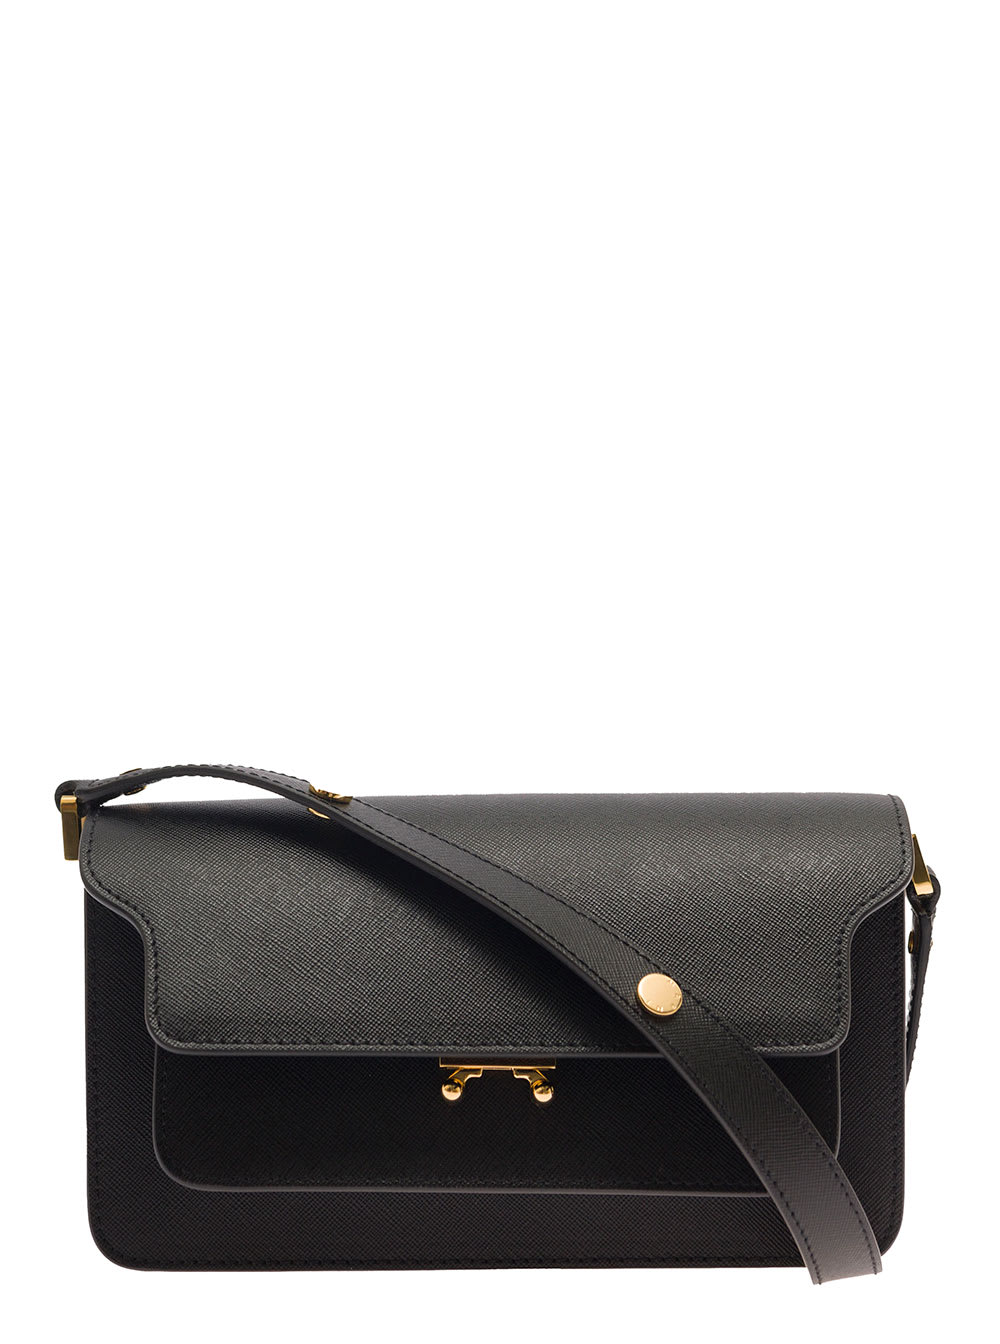 Marni Trunk Black Shoulder Bag With Push-Lock Fastening In Leather Woman